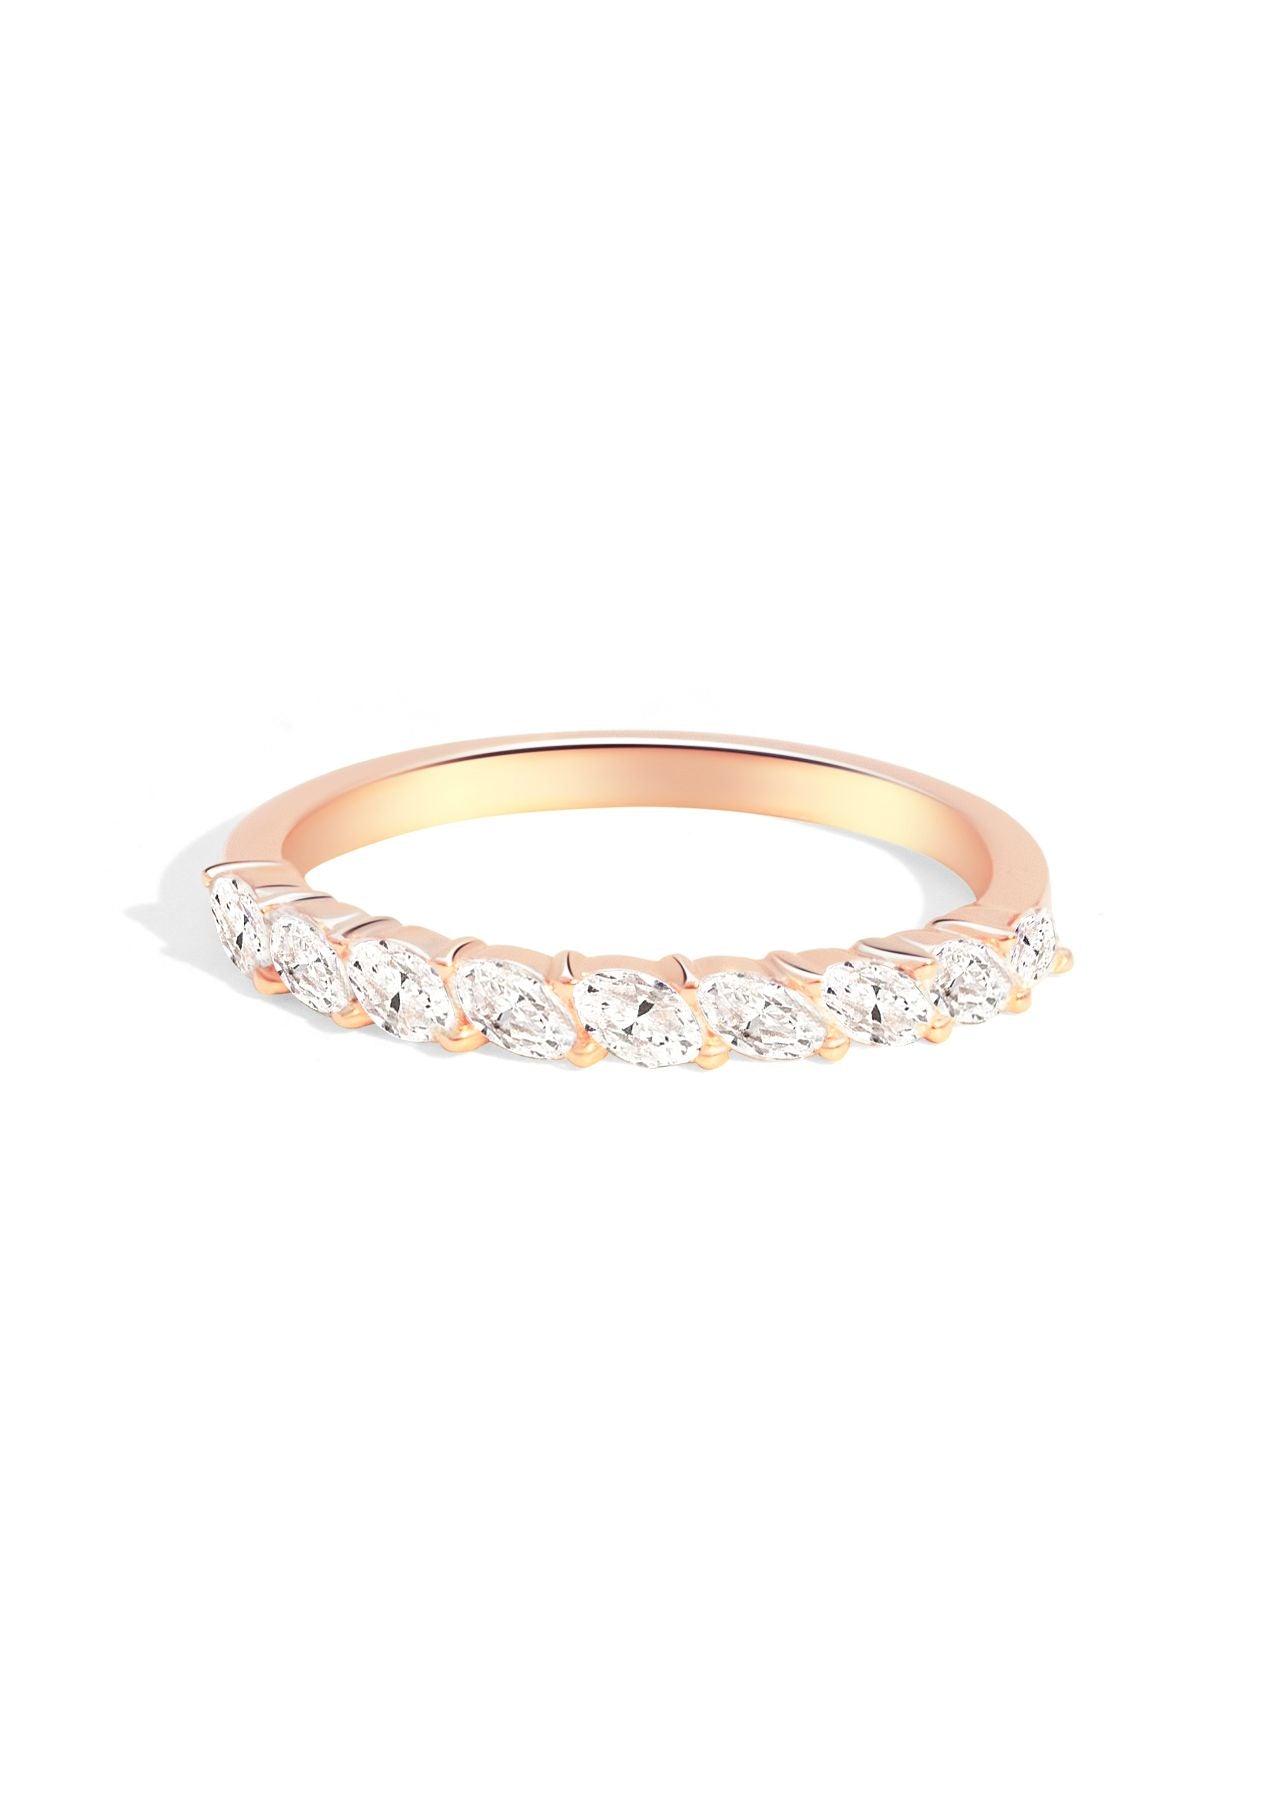 The Muse Rose Gold Diamond Band